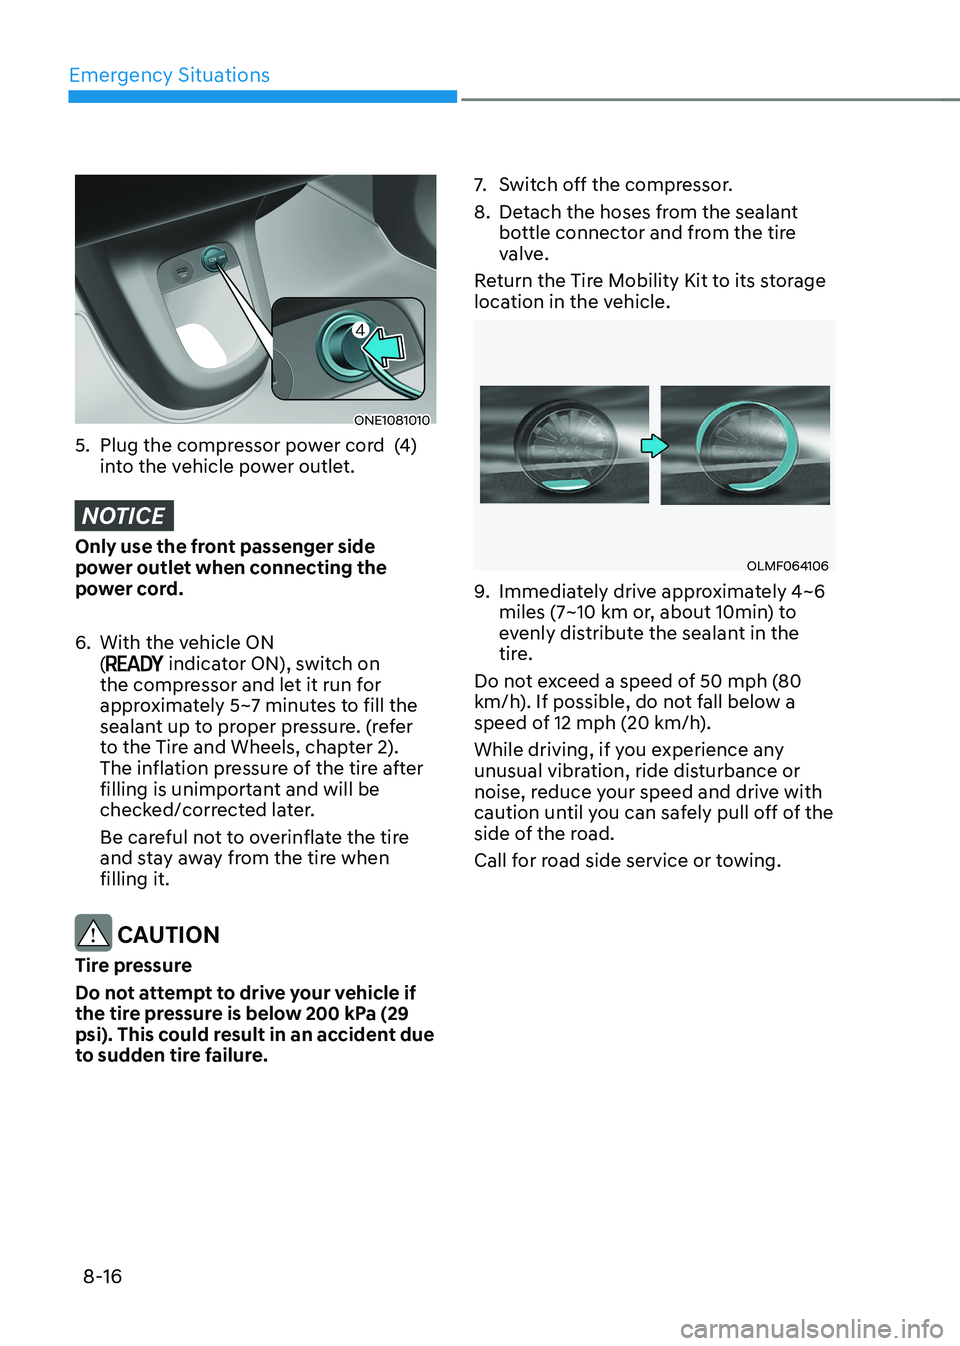 HYUNDAI IONIQ 5 2023  Owners Manual Emergency Situations
8-16
ONE1081010
5.  Plug the compressor power cord  (4)  into the vehicle power outlet.
NOTICE
Only use the front passenger side  
power outlet when connecting the 
power cord. 
6